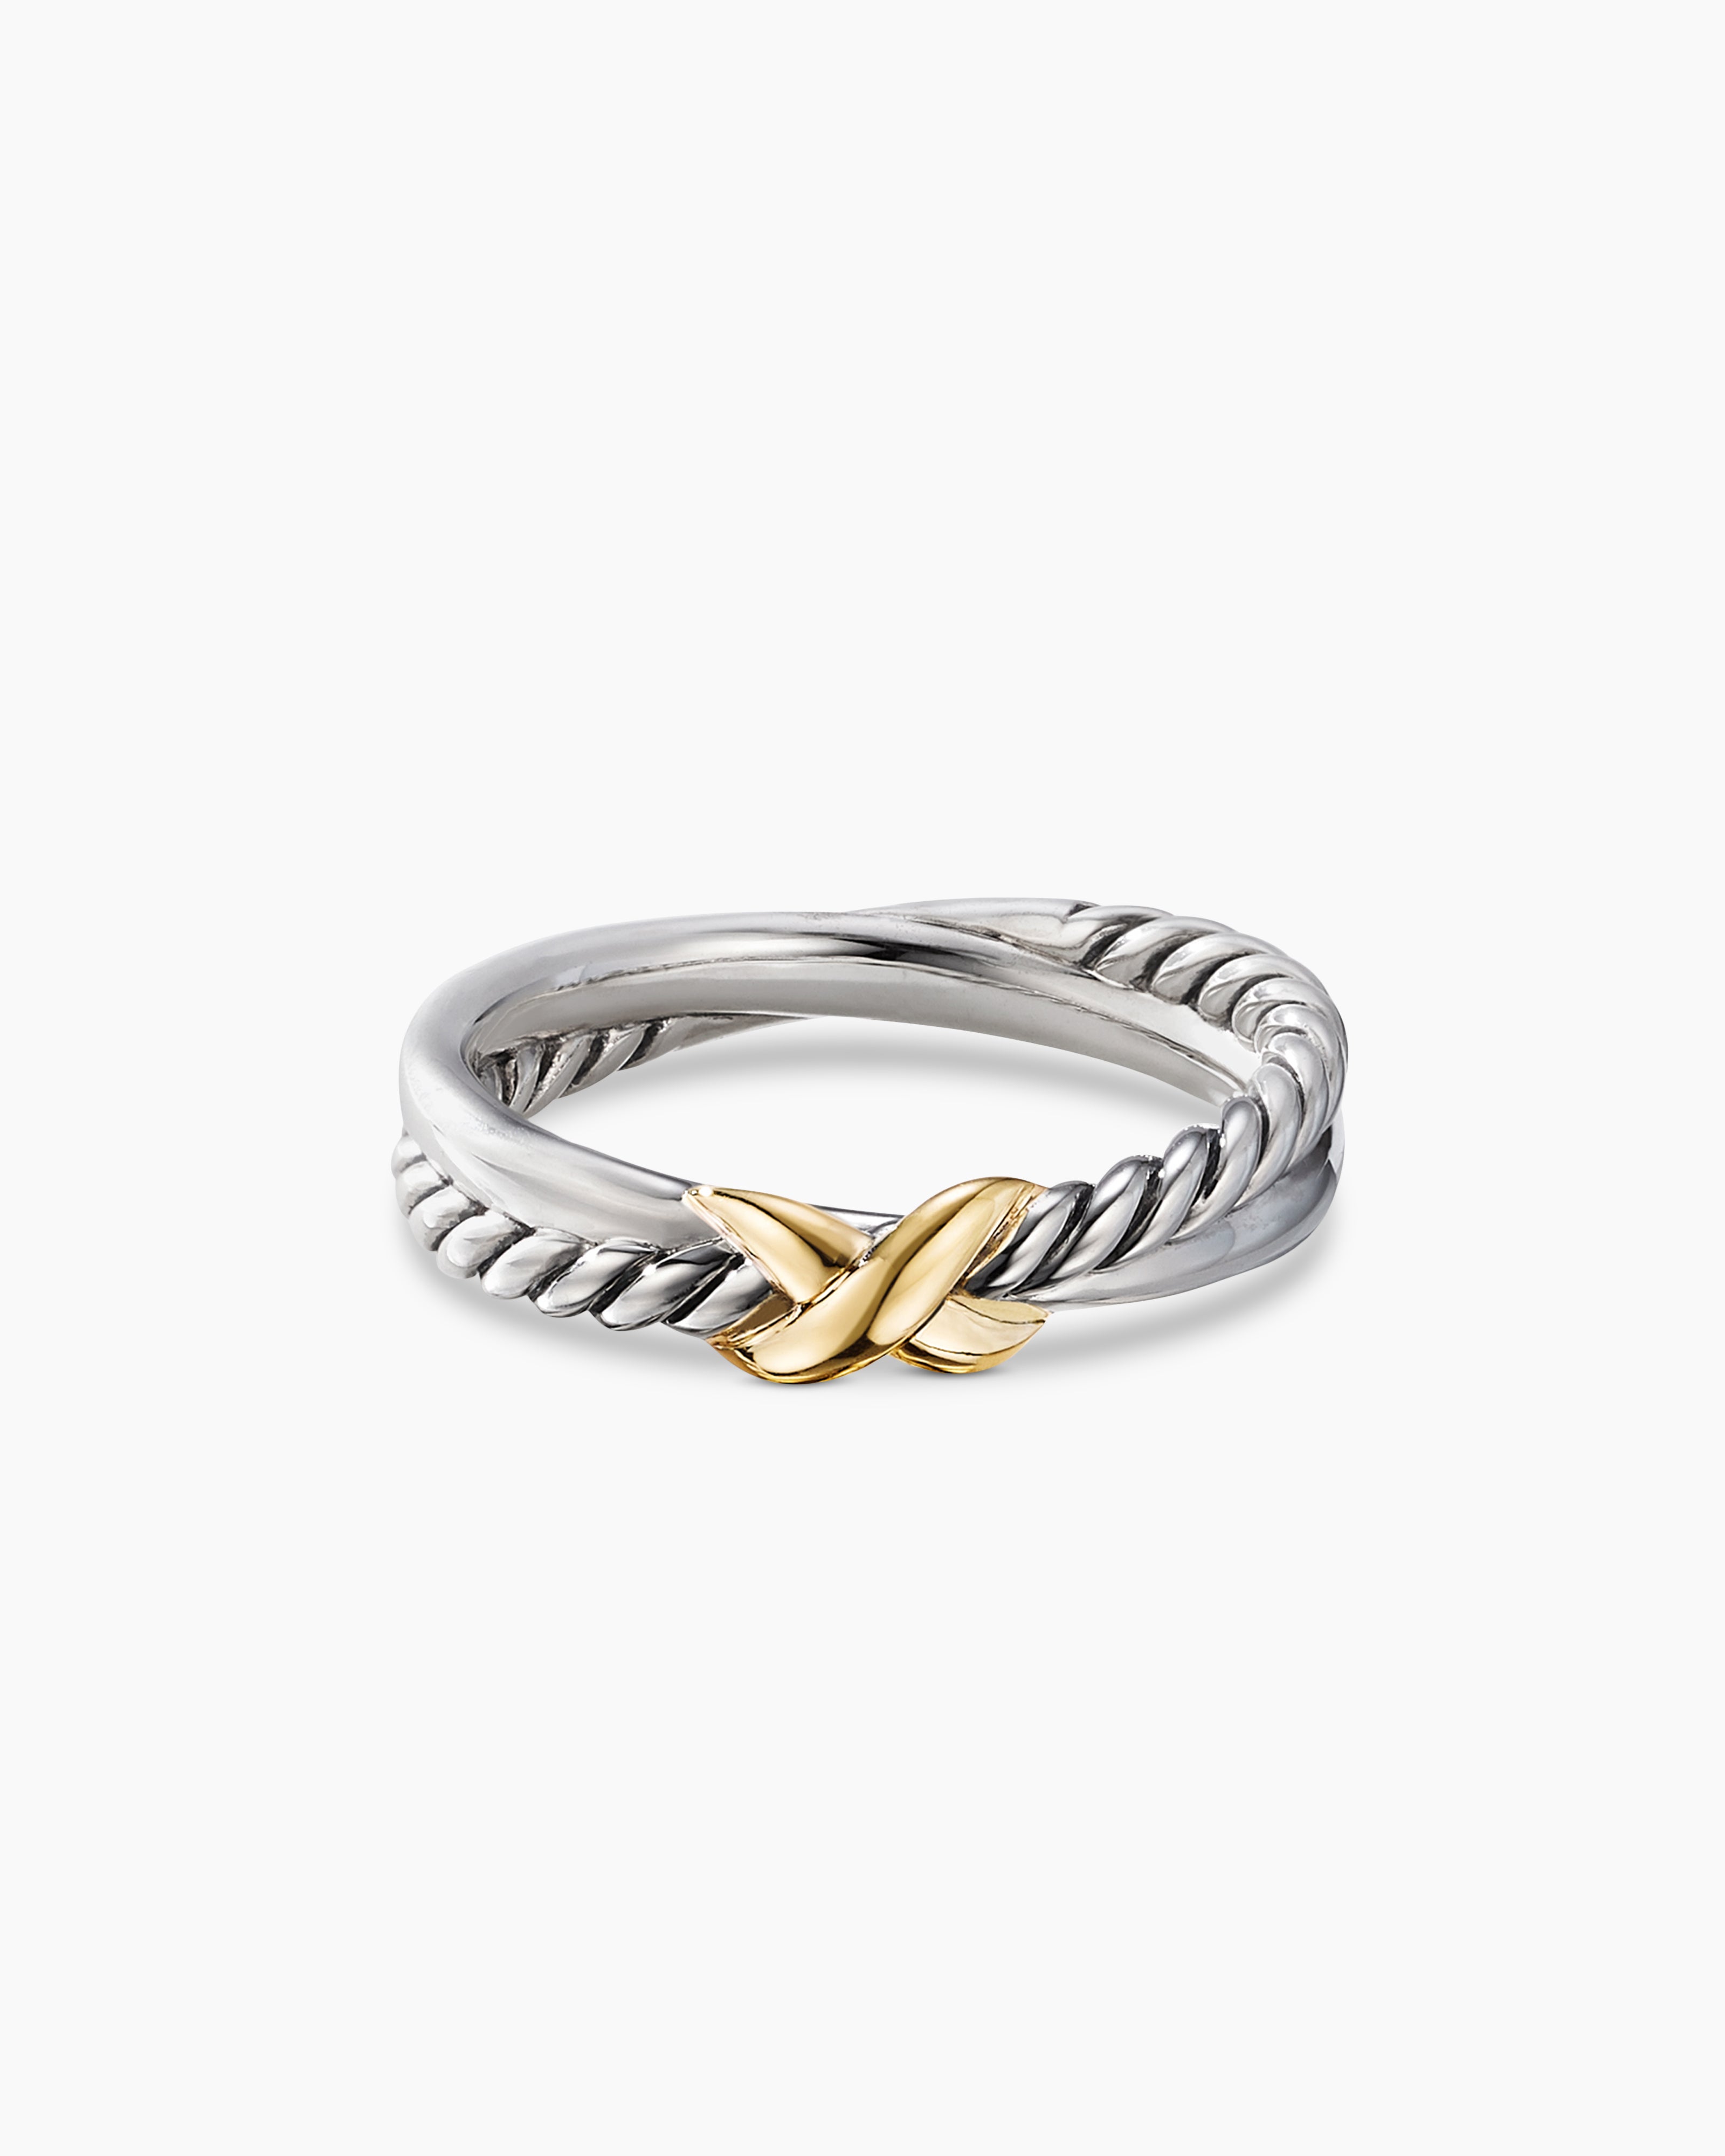 Petite X Ring in Sterling Silver with 18K Yellow Gold, 4mm | David ...